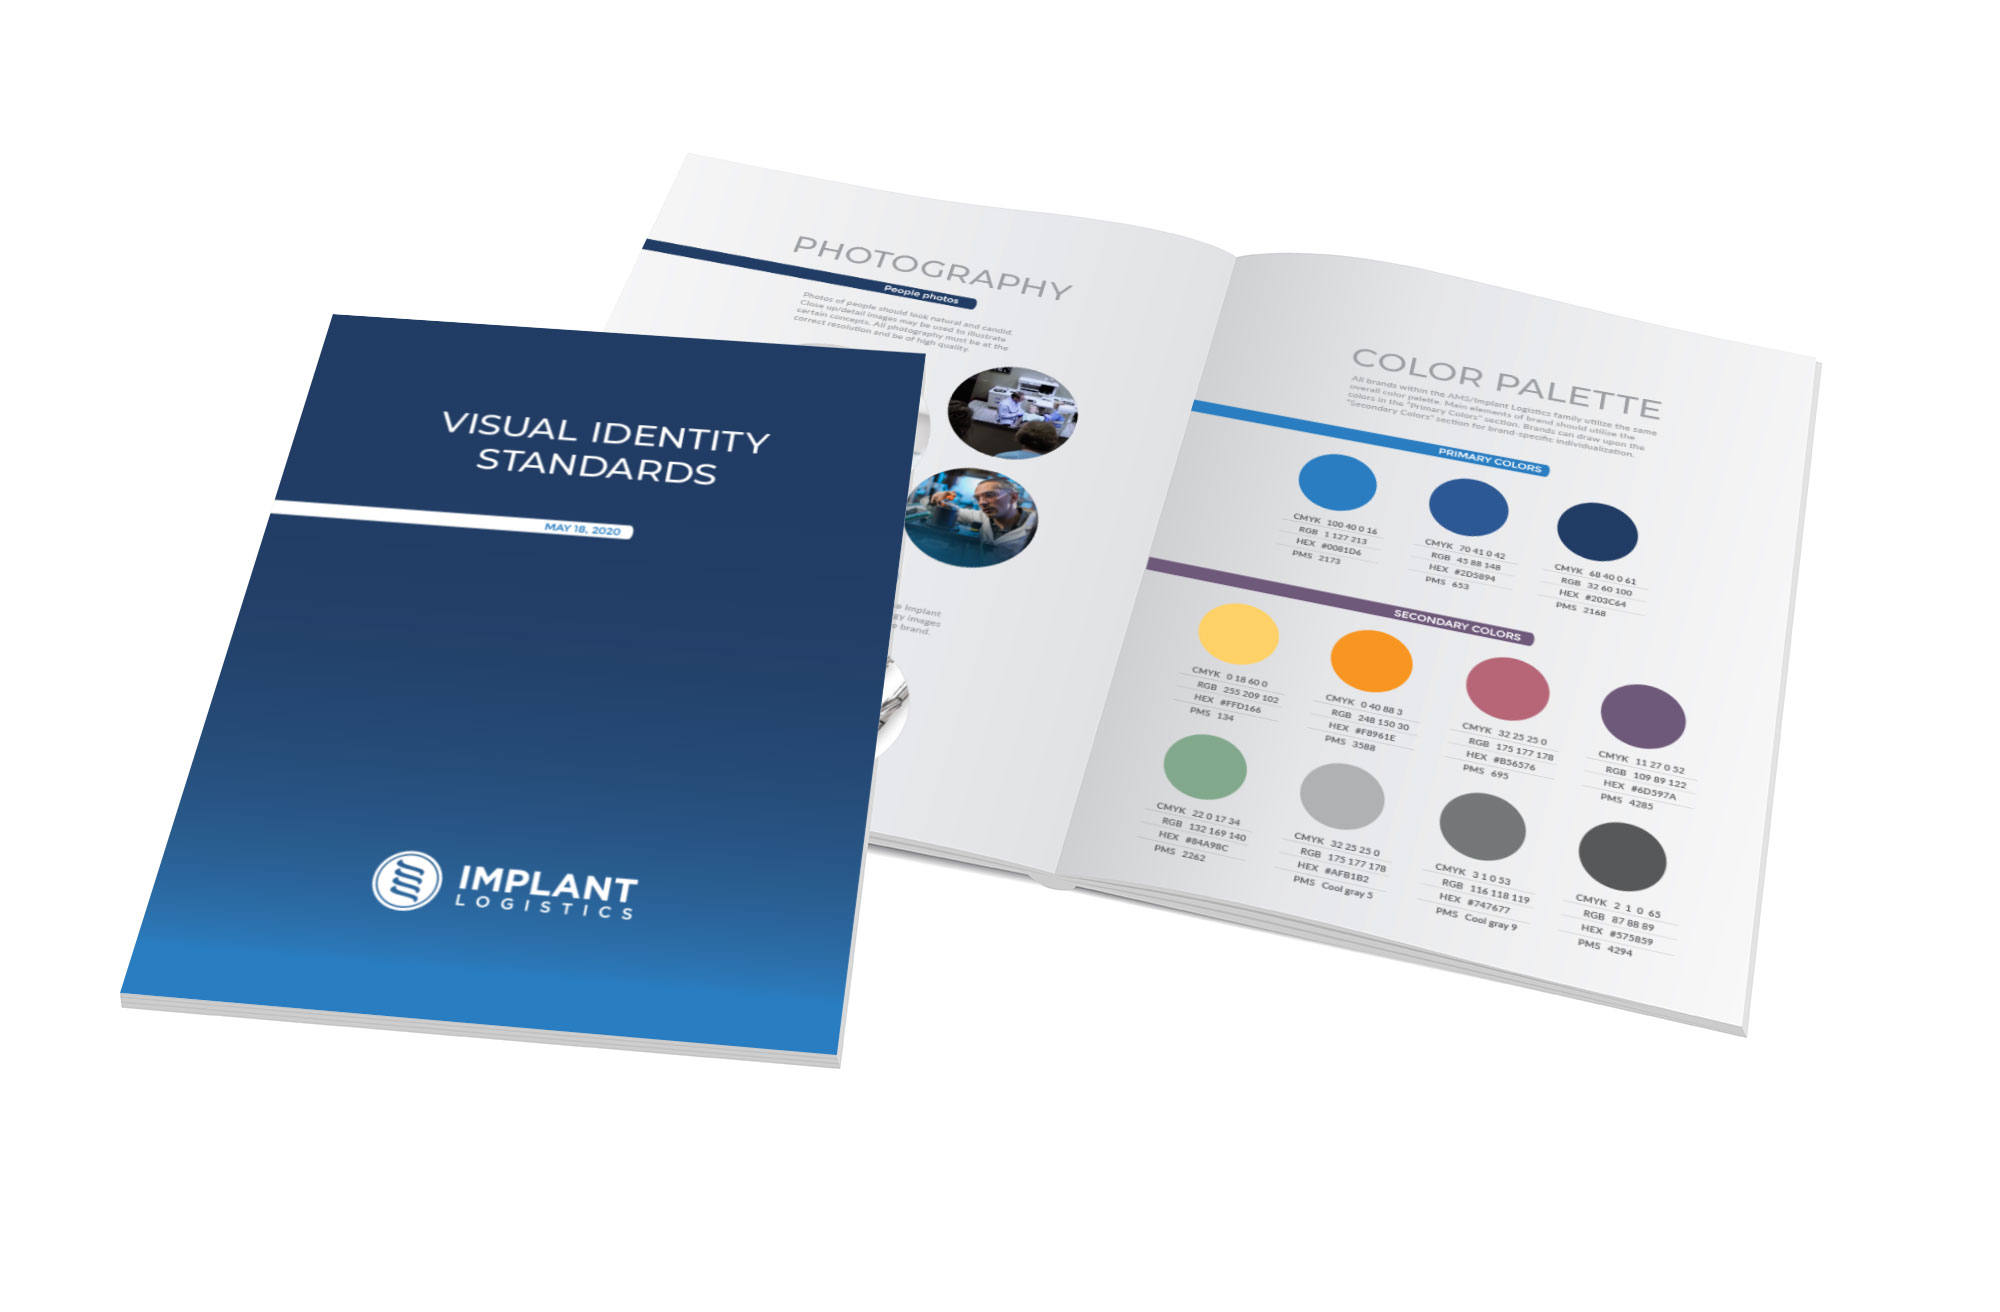 Implant Logistics visual identity standards guide created by Vendi Advertising 